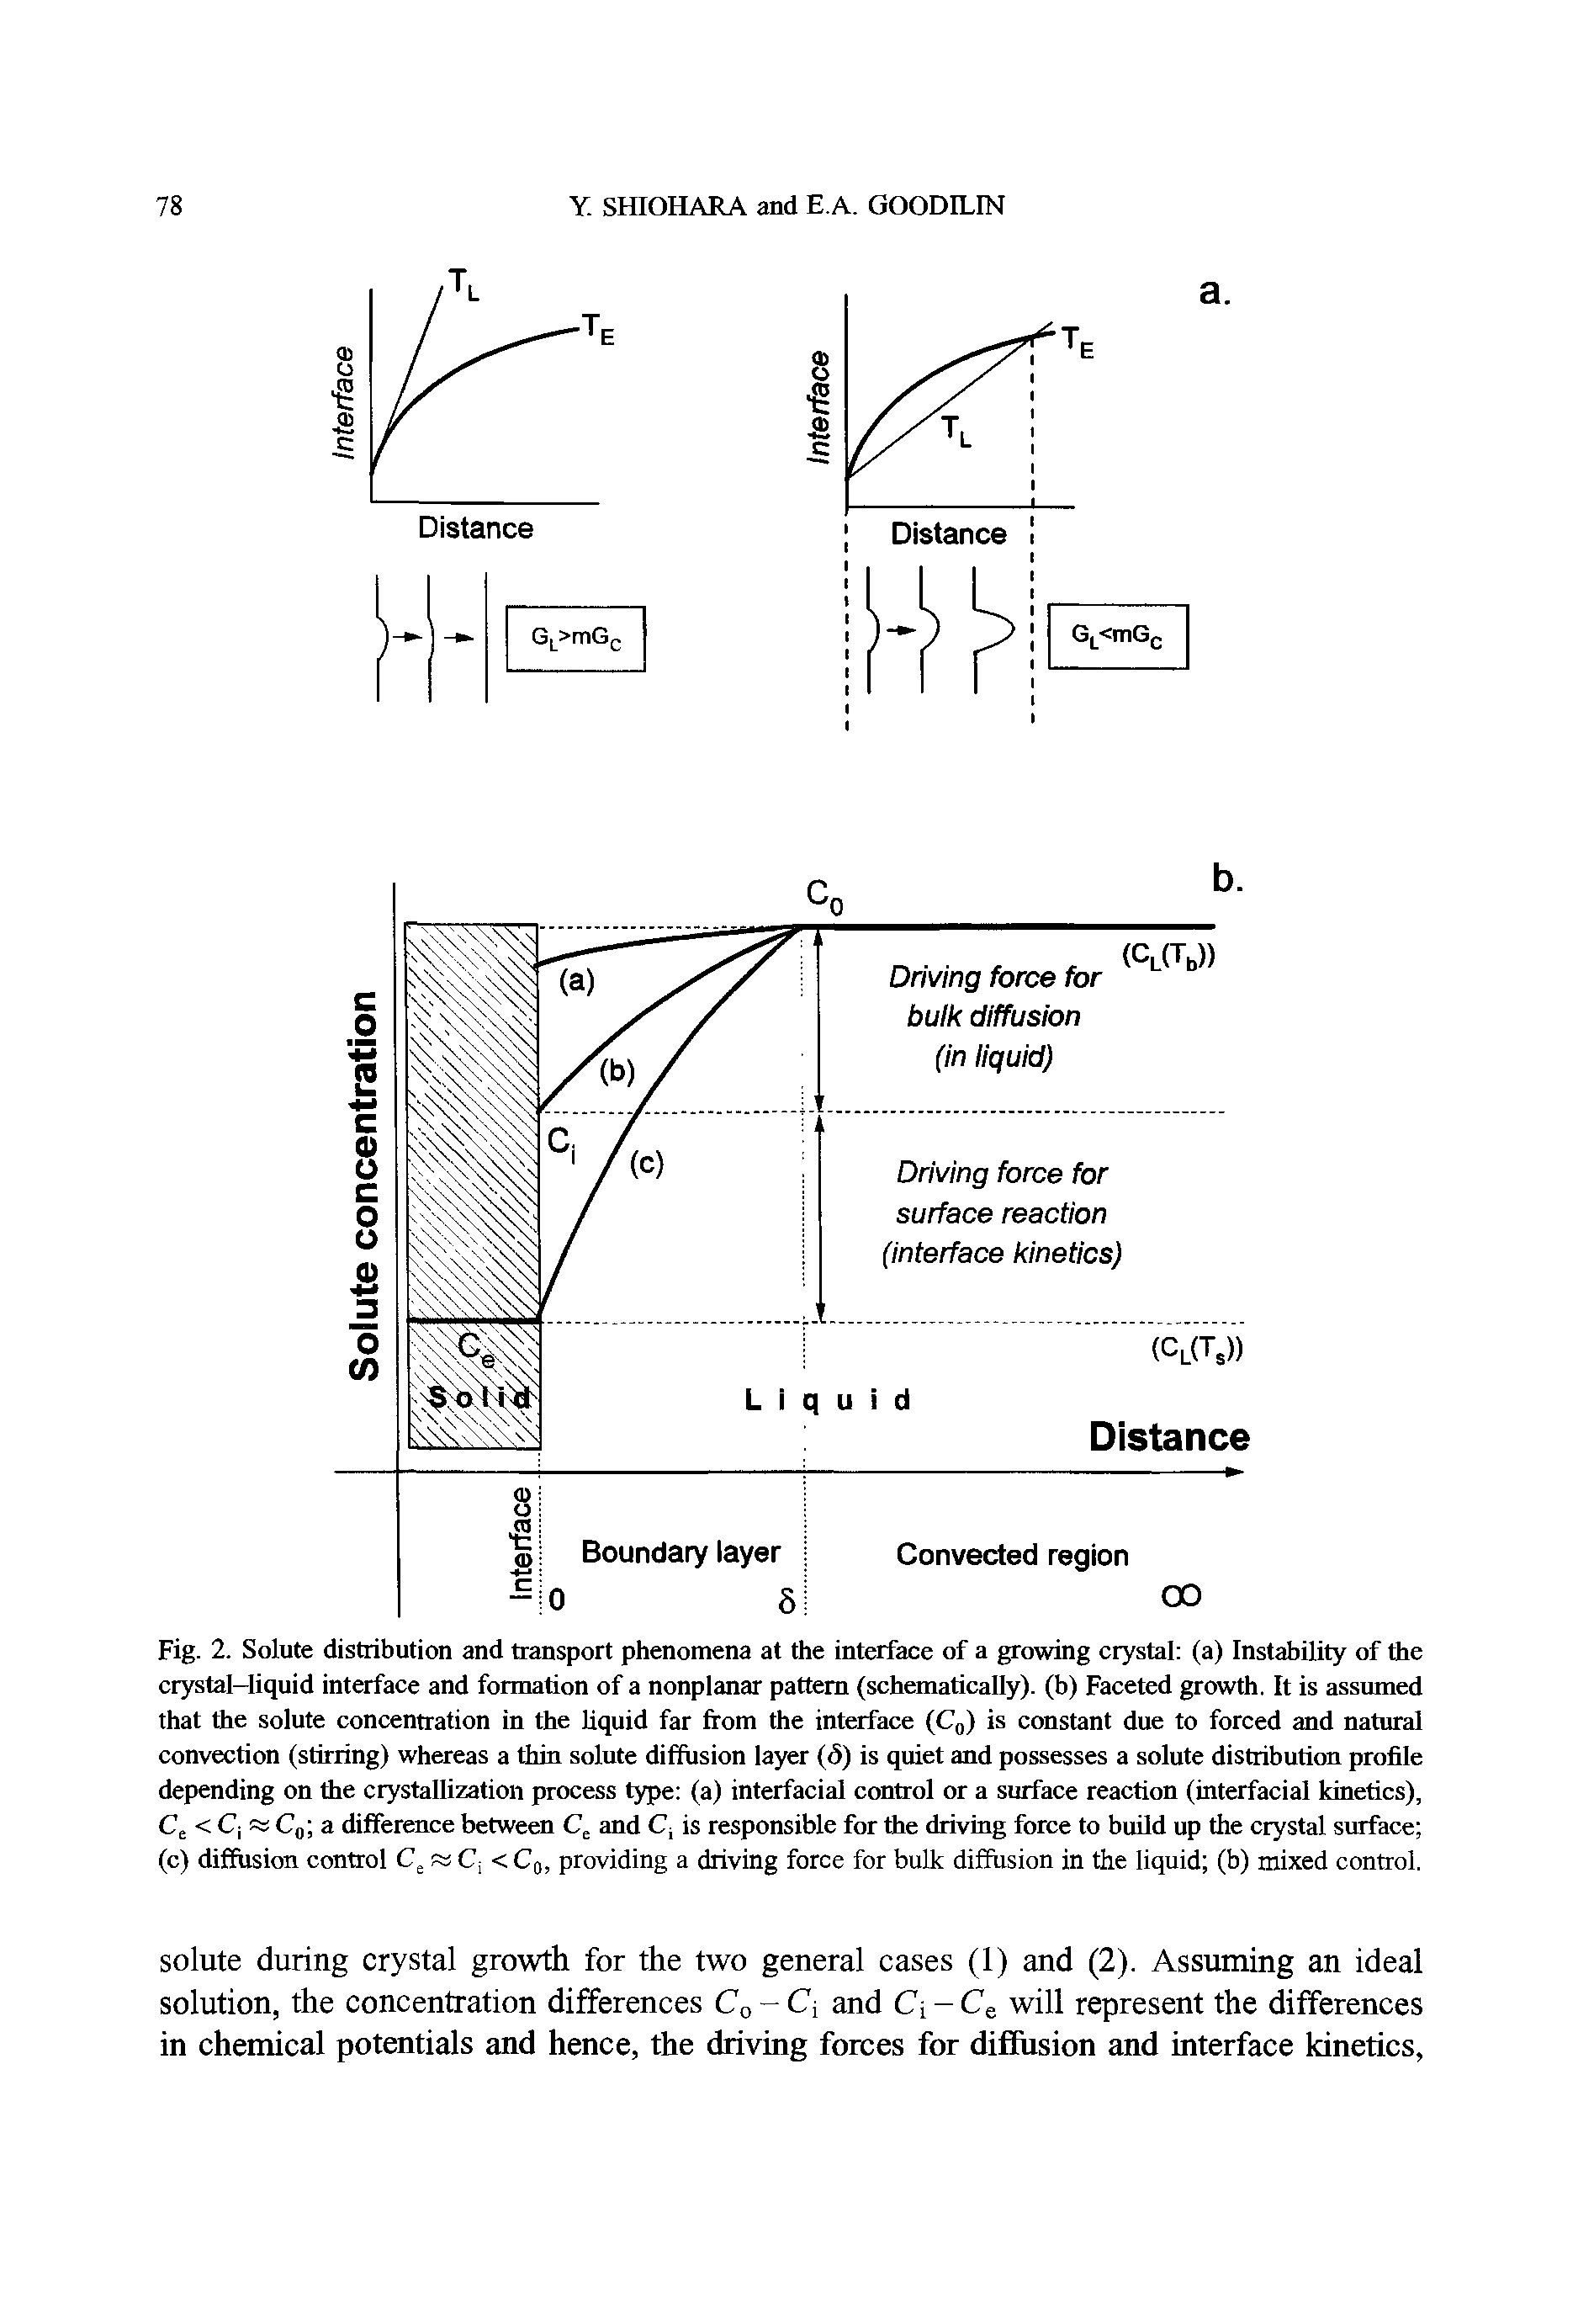 Fig. 2. Solute distribution and transport phenomena at the interface of a growing crystal (a) Instability of the crystal-liquid interface and formation of a nonplanar pattern (schematically), (b) Faceted growth. It is assumed that the solute concentration in the liquid far from the interface (Cq) is constant due to forced and natural convection (stirring) whereas a thin solute diffusion layer (S) is quiet and possesses a solute distribution profile depending on the crystallization process type (a) interfacial control or a surface reaction (interfacial kinetics), Ce < C RJ C a difference between Cj and Cj is responsible for the driving force to buUd up the crystal surface (c) diffusion control Cj < Cj, providing a driving force for bulk diffusion in the liquid (b) mixed control.